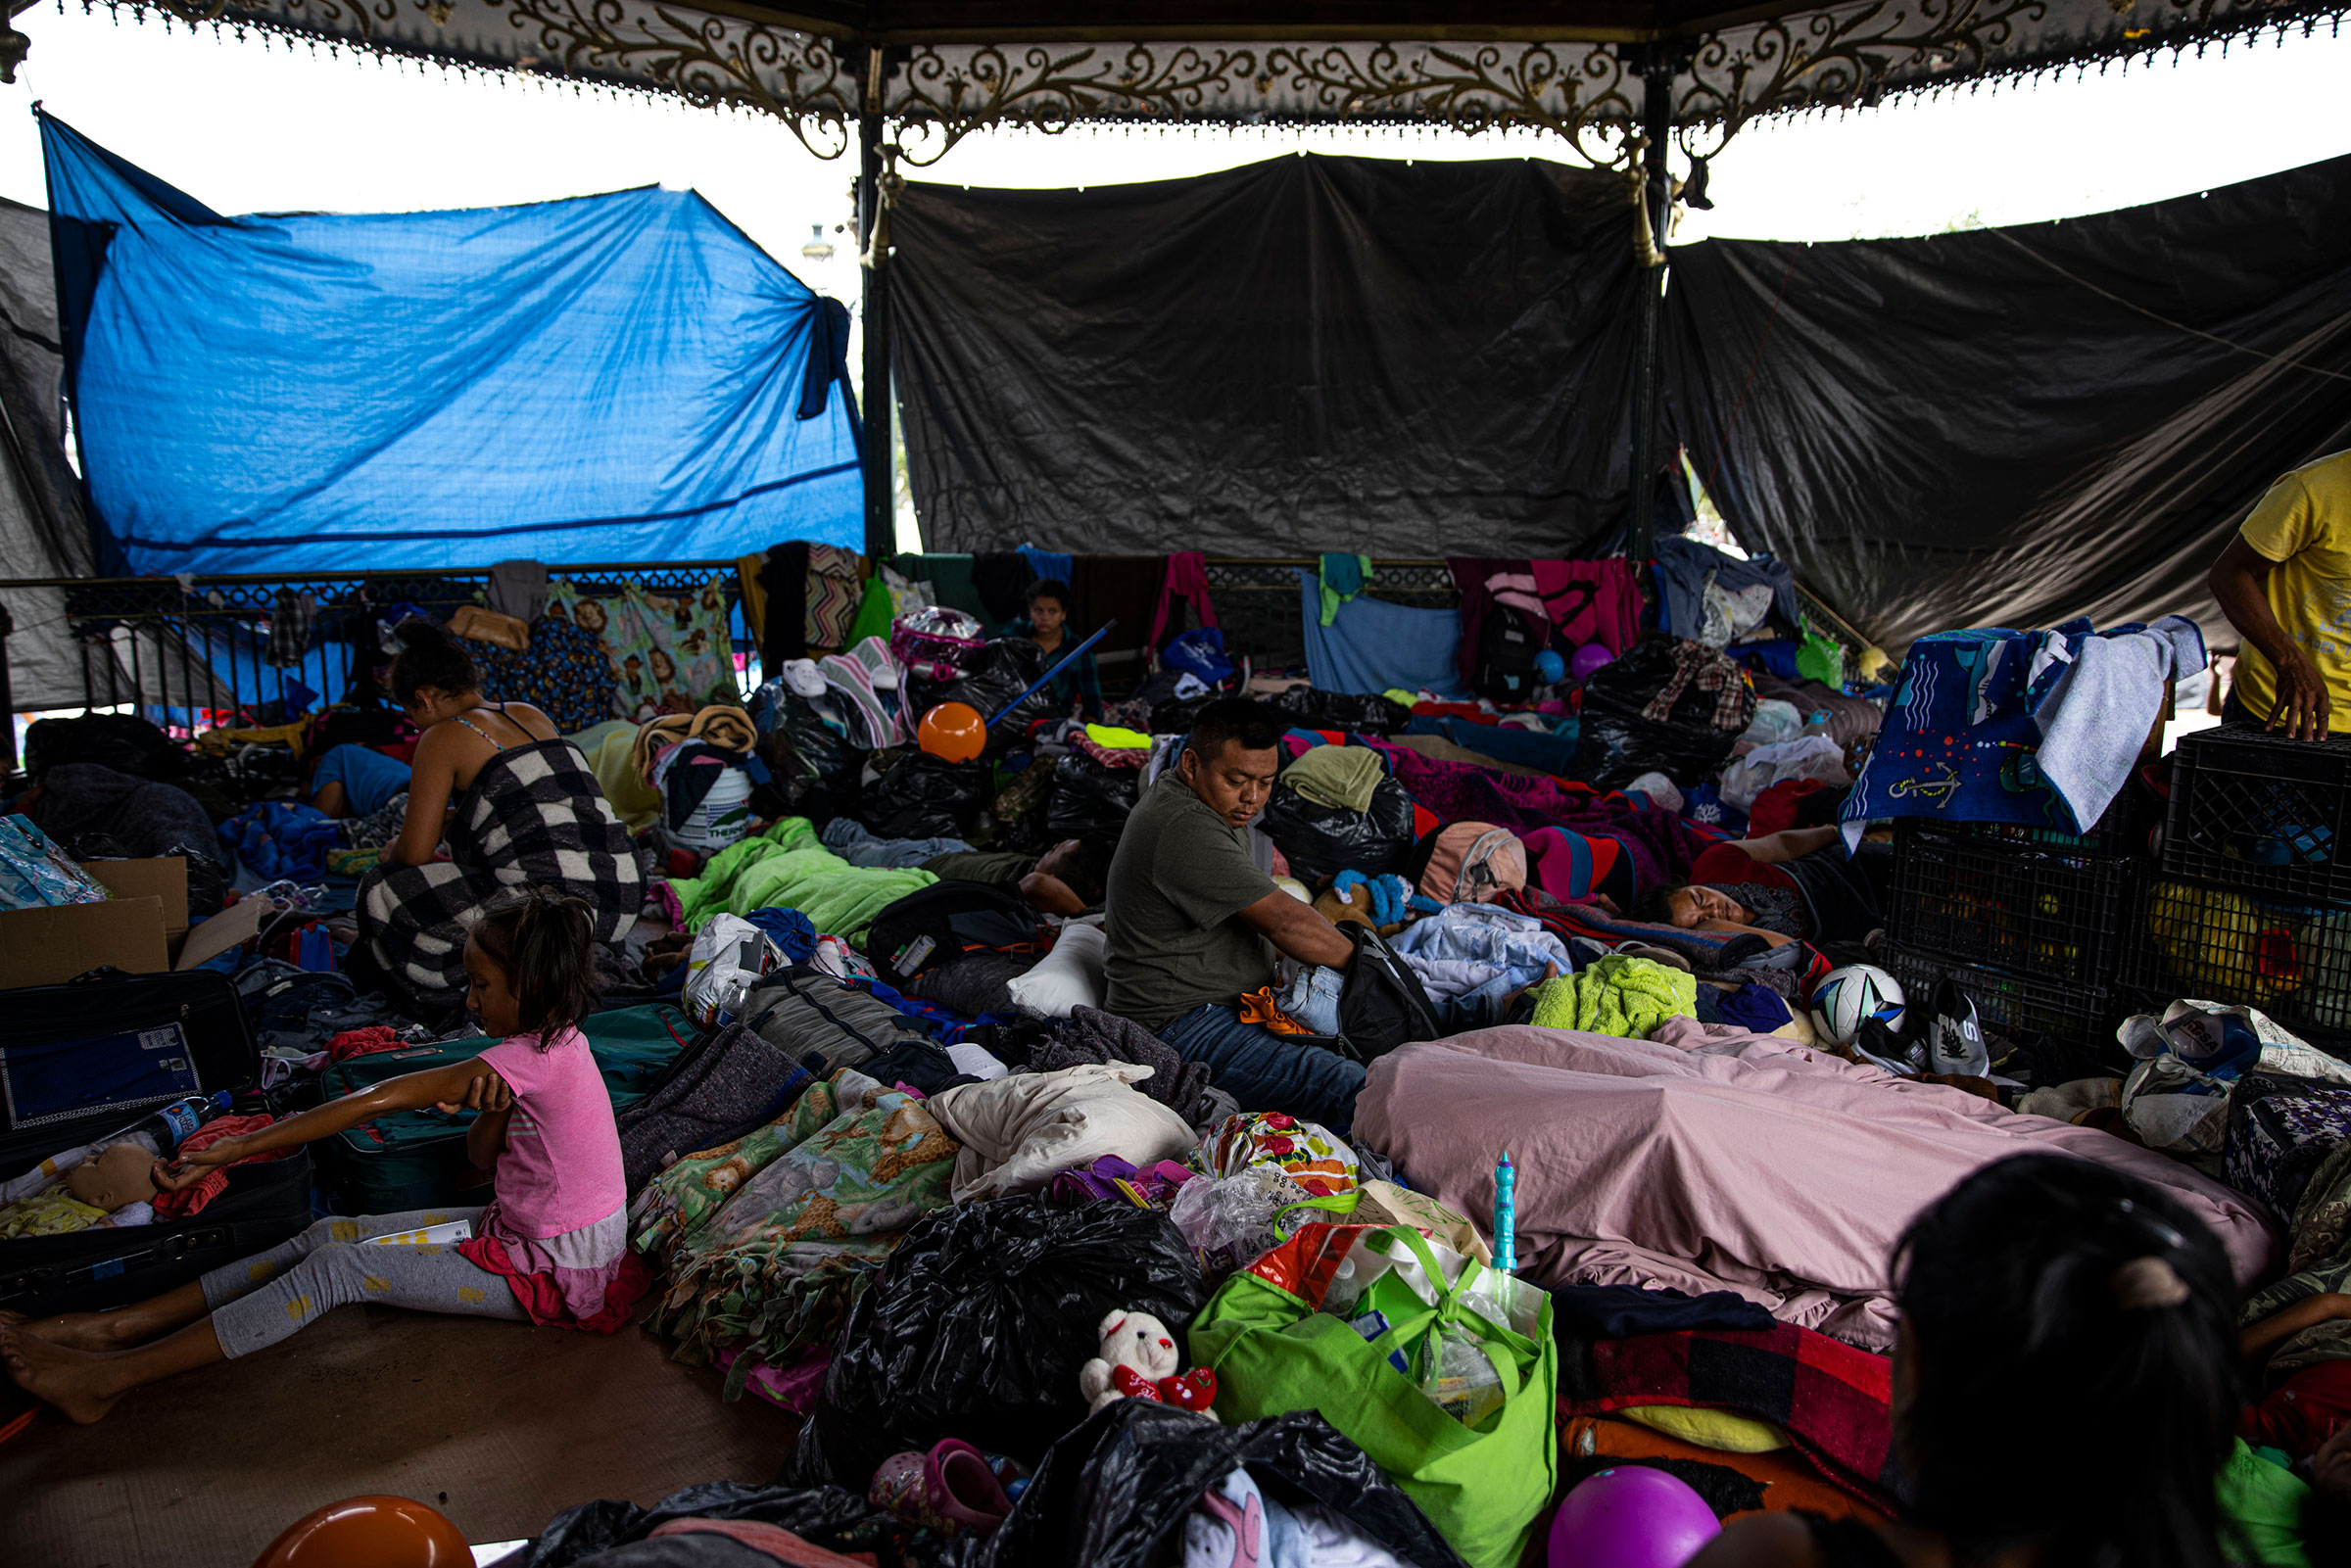 Migrants take refuge in a gazebo in Reynosa, Tamaulipas, Mexico on May 6, 2021. Hundreds of migrants have begun living in shelters and a makeshift tent encampment in Reynosa as a result of Title 42, a Trump-era policy that has remained in place under the Biden Administration and allows the government to immediately “expel” anyone who attempts to enter the U.S., even if they wish to make a claim for asylum, because of the risks posed by COVID-19. (Yael Martinez—Magnum Photos for TIME)